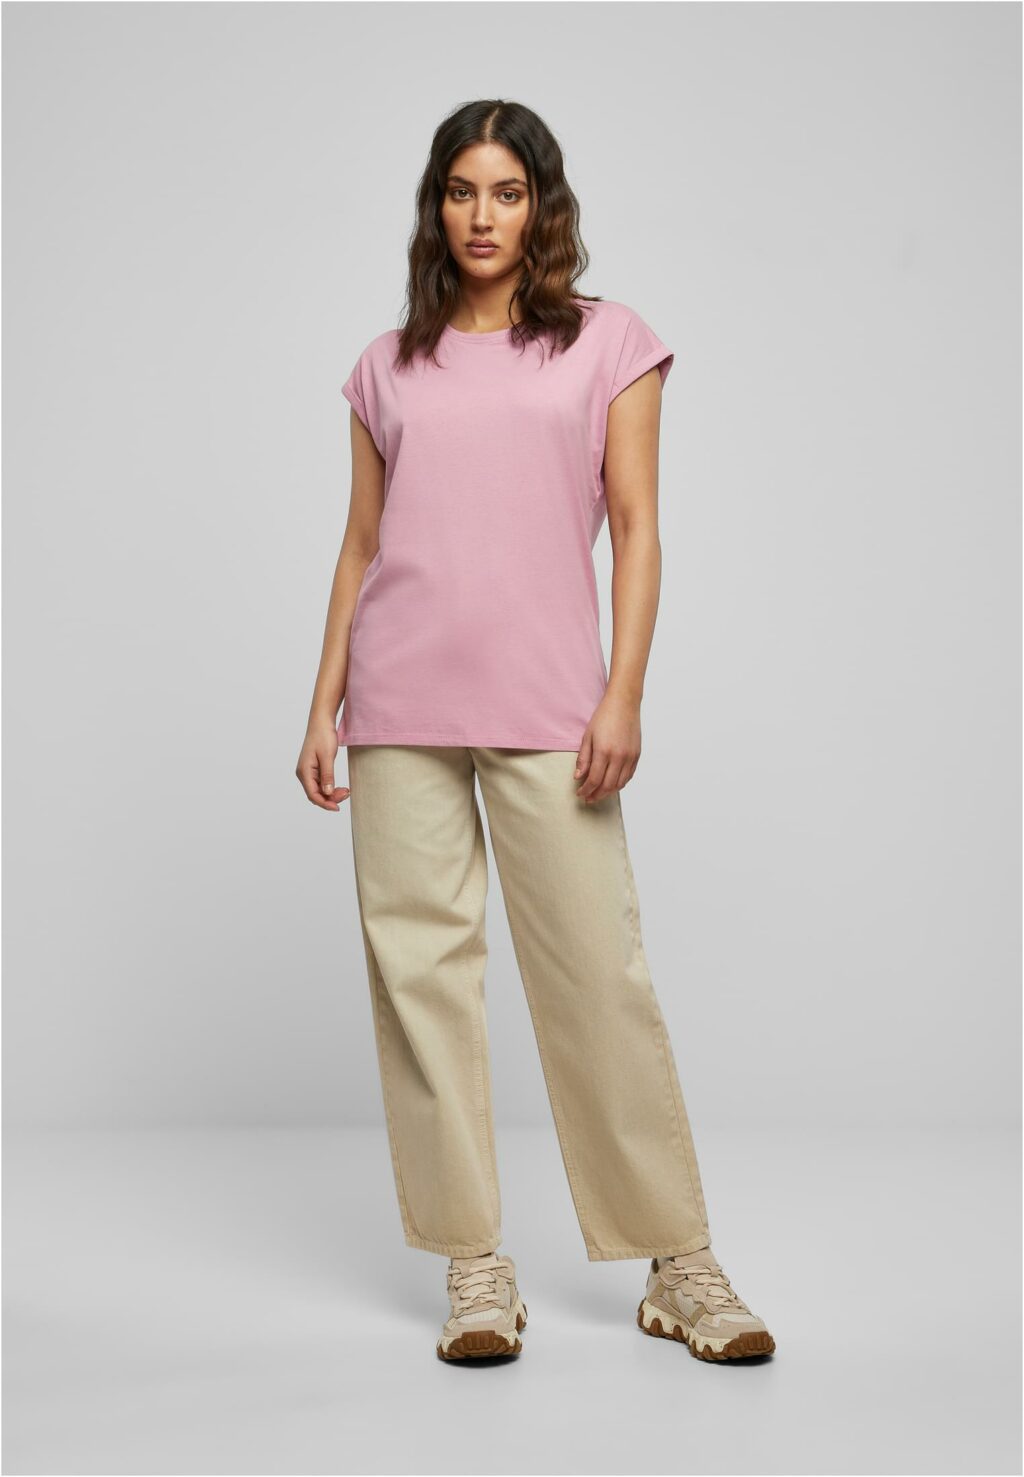 Urban Classics Ladies Extended Shoulder Tee coolpink TB771